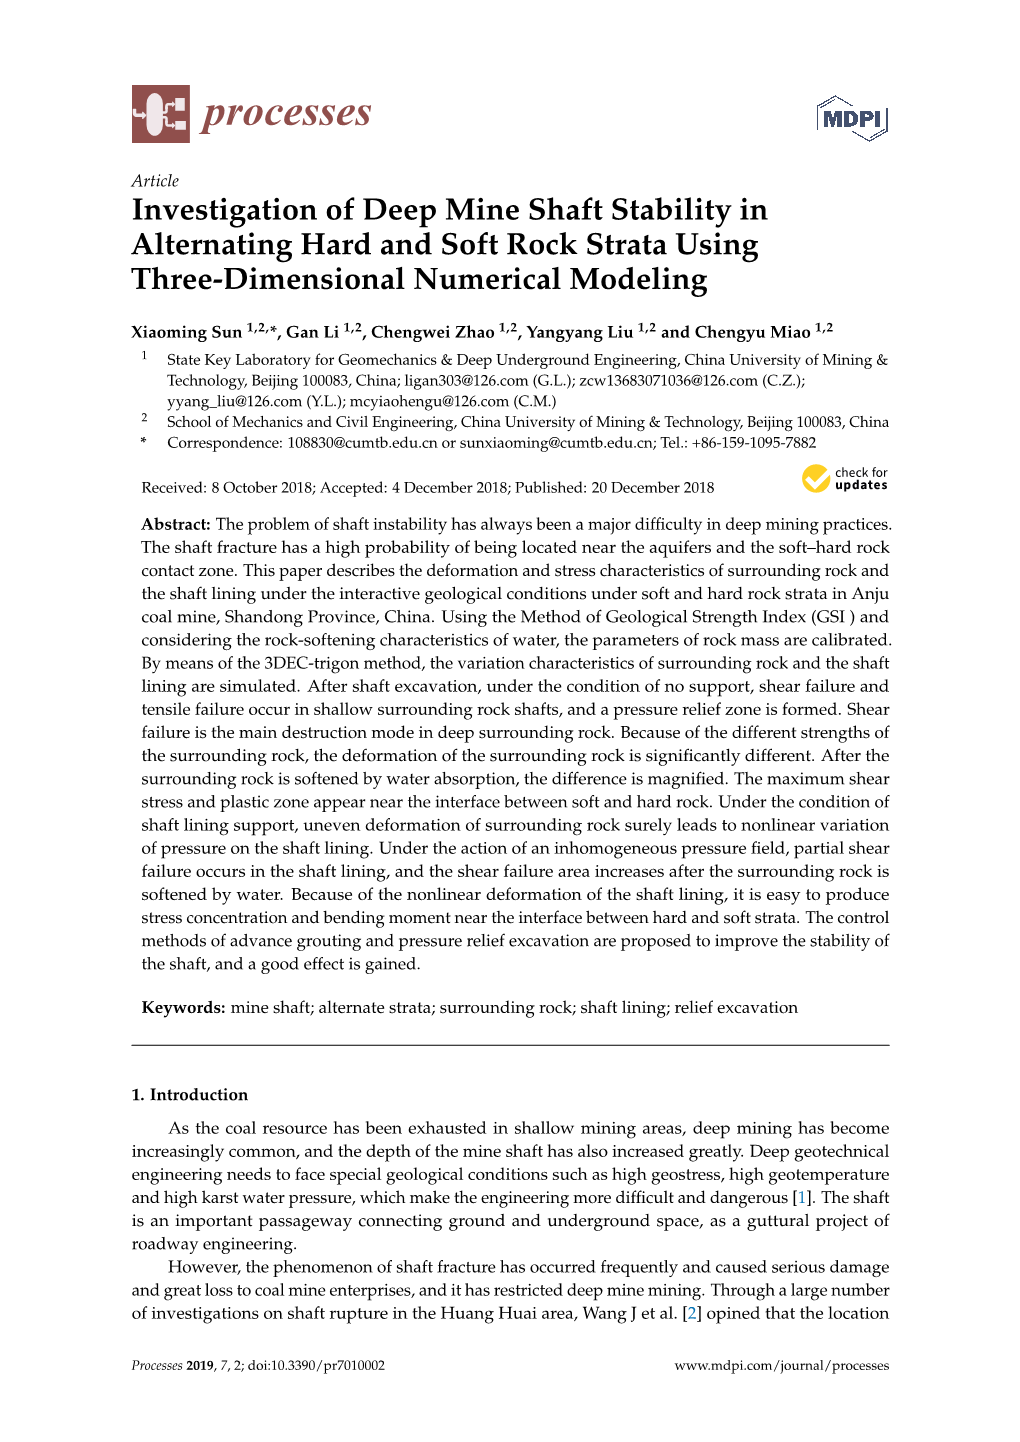 Investigation of Deep Mine Shaft Stability in Alternating Hard and Soft Rock Strata Using Three-Dimensional Numerical Modeling